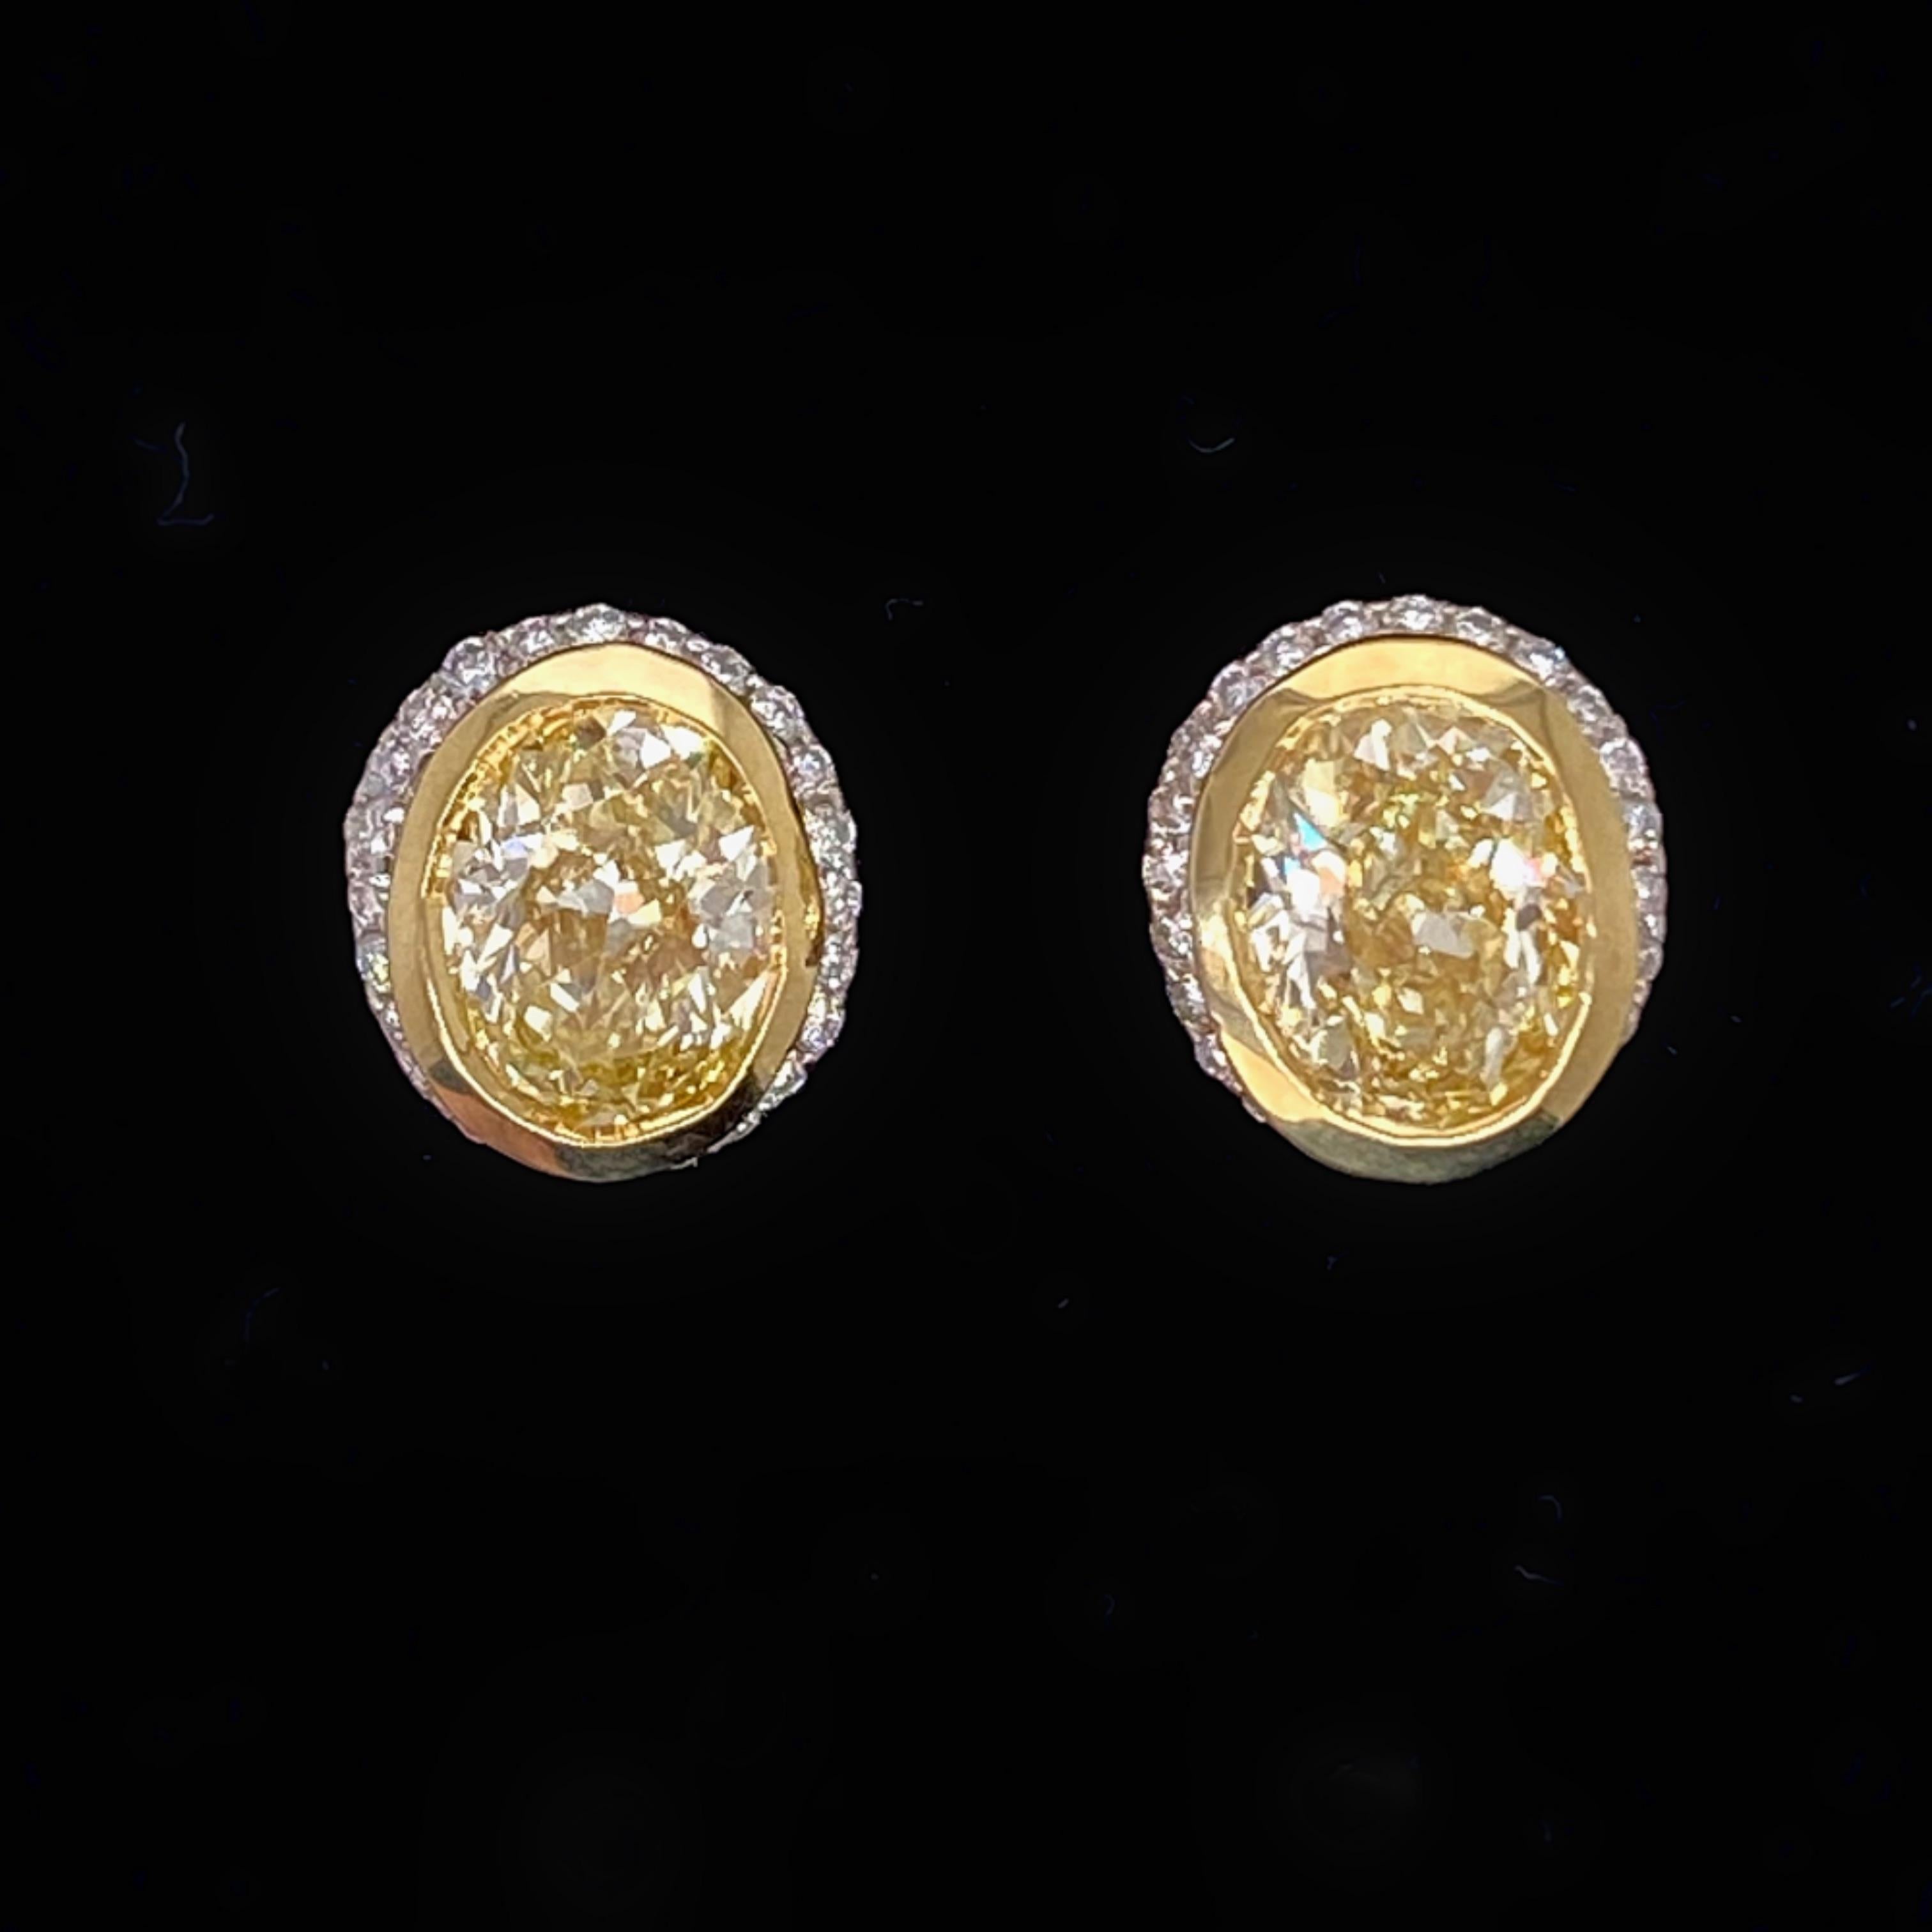 Fancy Diamond Oval Earrings
Style:   Bezel - Set with Micro Pave Diamond Halo
Metal:  18kt Yellow Gold and Platinum
Measurements:  8.75 X 7.42 X 6.27 MM
TCW:  2.25 tcw
Main Diamond:  2 Oval Cut Diamonds Bezel - Set in 18kt Yellow Gold 2.00 tcw
Color